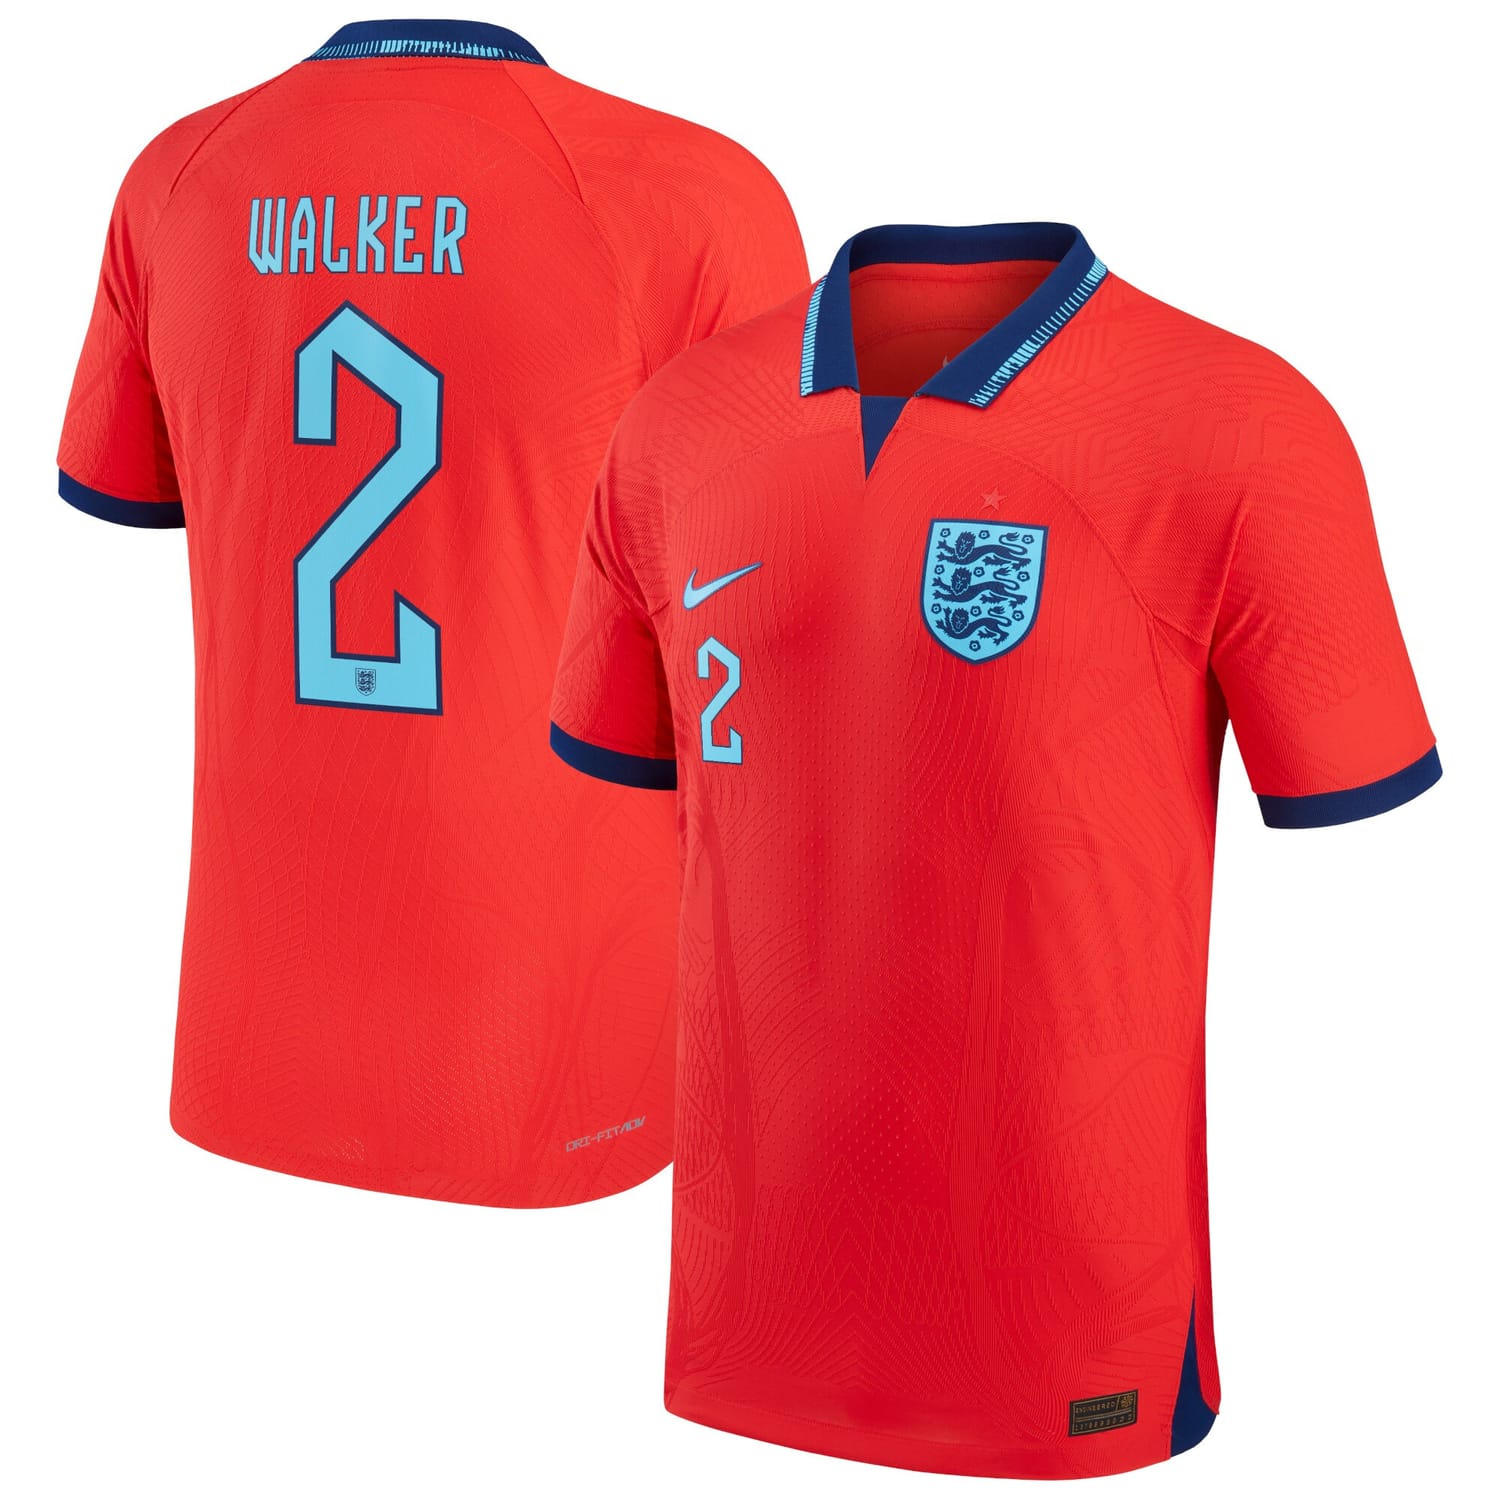 England National Team Away Authentic Jersey Shirt 2022 player Kyle Walker 2 printing for Men